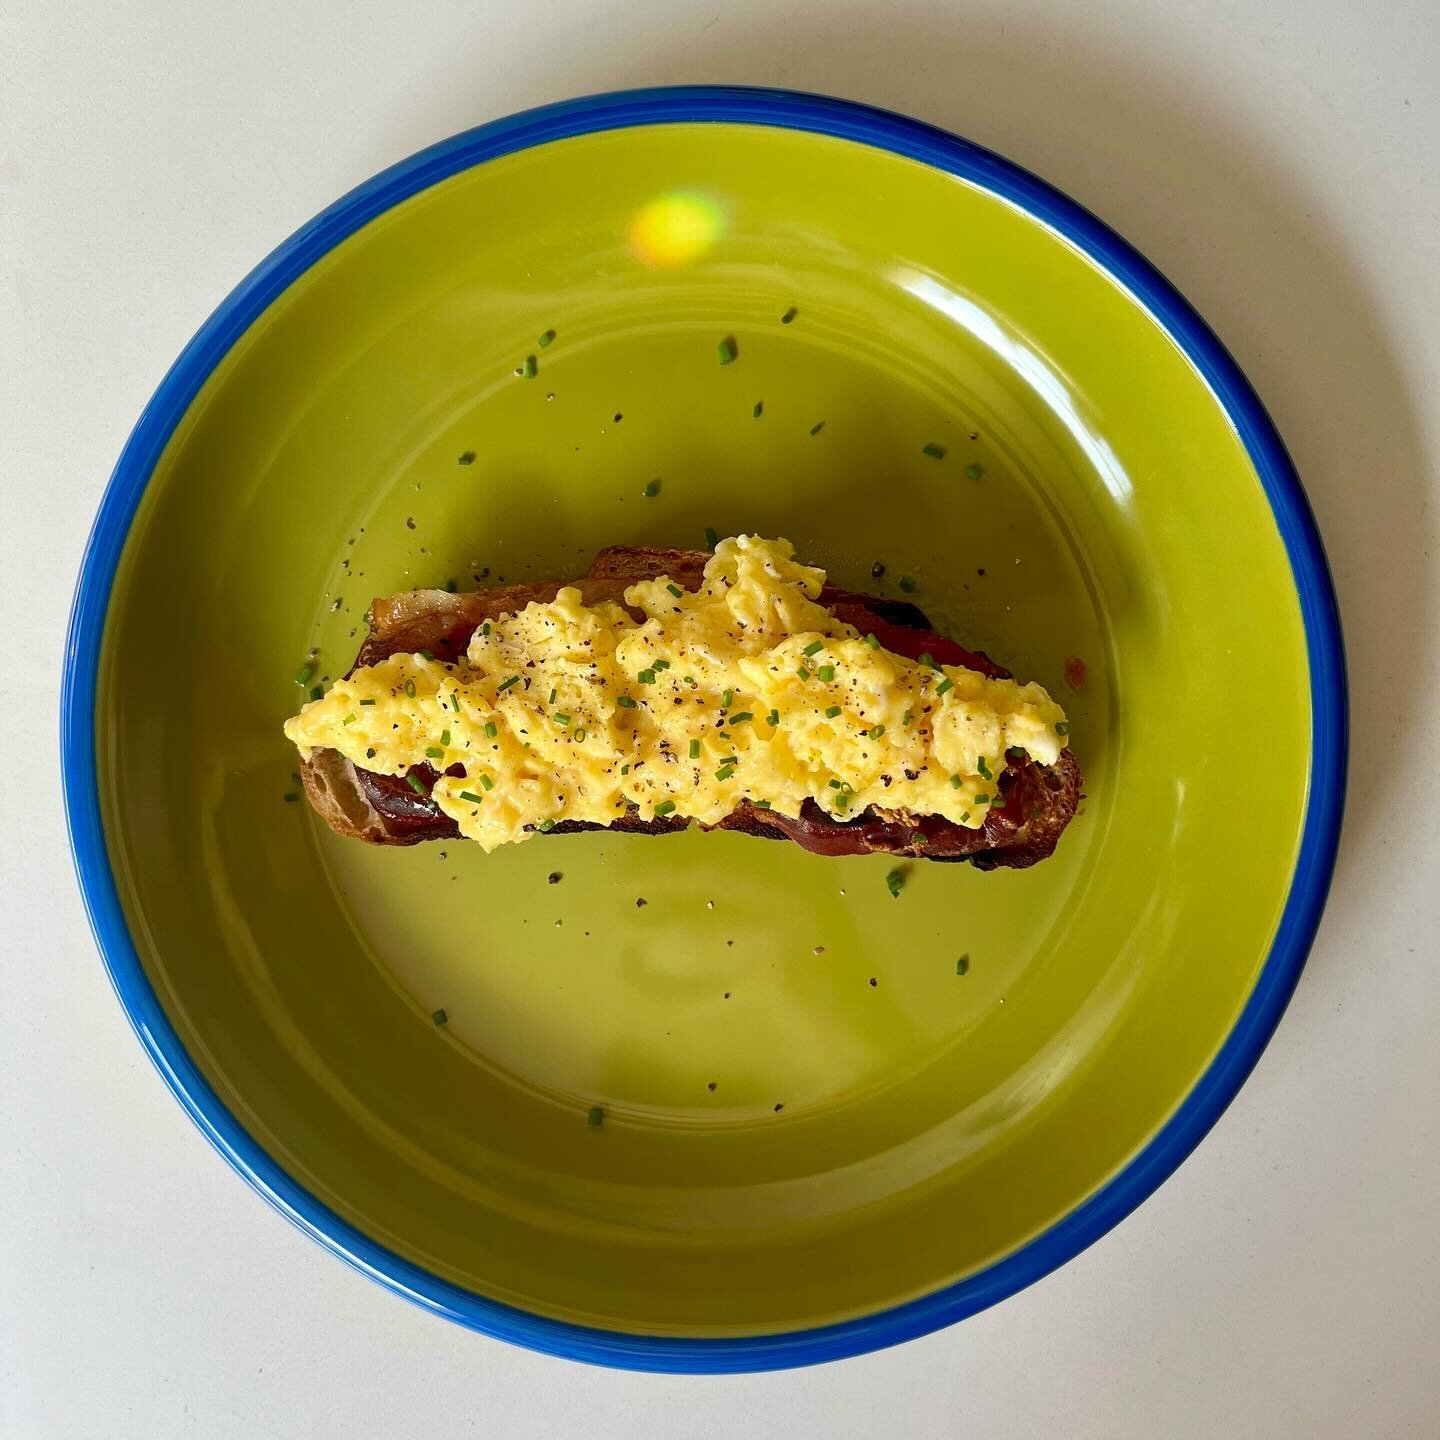 Sunday brunch-- @southwestbreads potato rosemary sourdough loaf (the best), salted butter, broiled prosciutto, soft scrambled eggs, topped with chives and pepper!